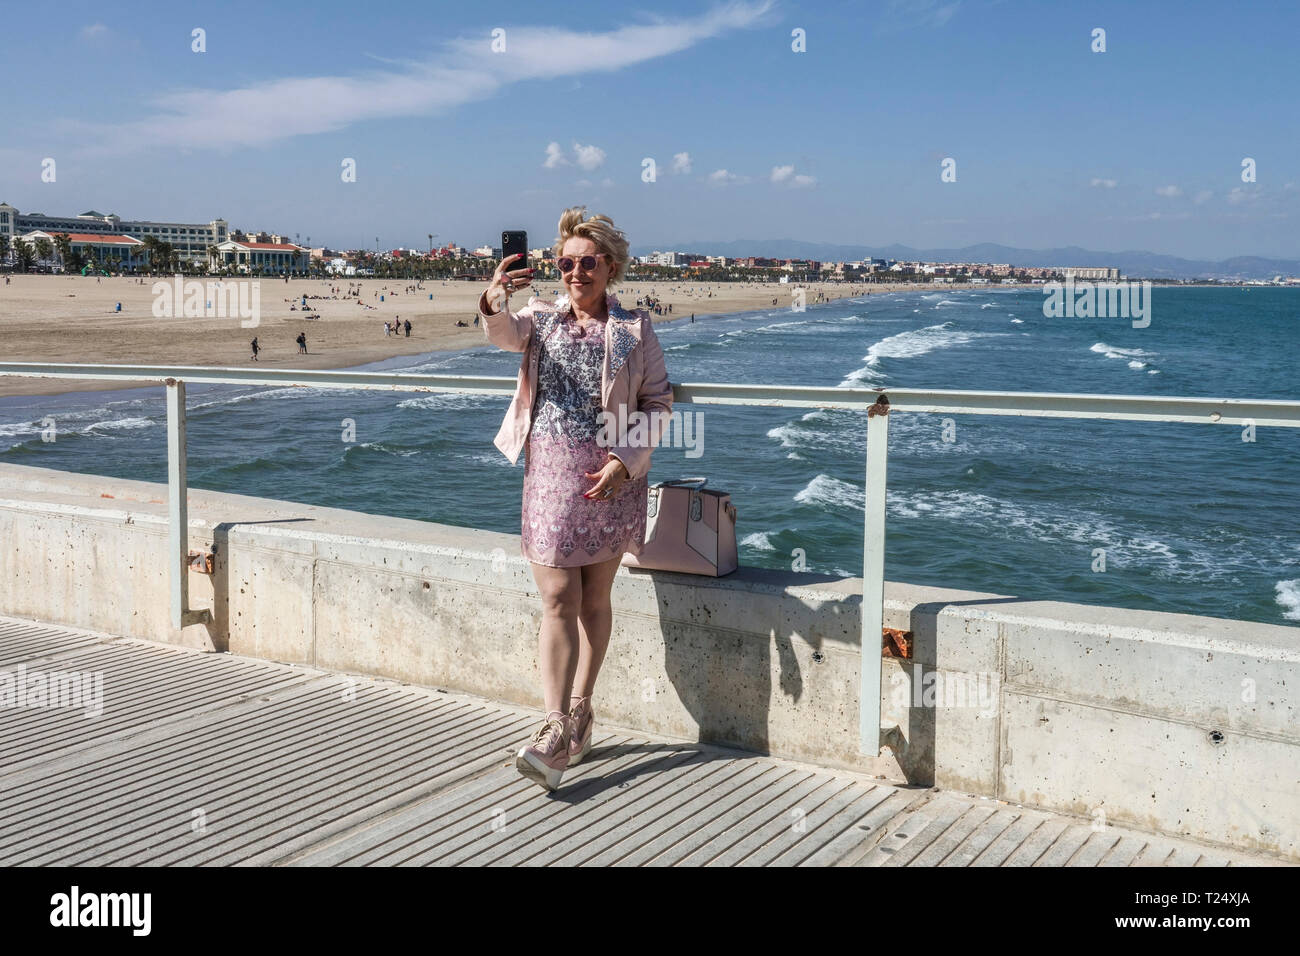 A woman in a beige suit taking a selfie on a concrete pier with sea and Malvarrosa beach Valencia Sea view Valencia Spain beach Stock Photo